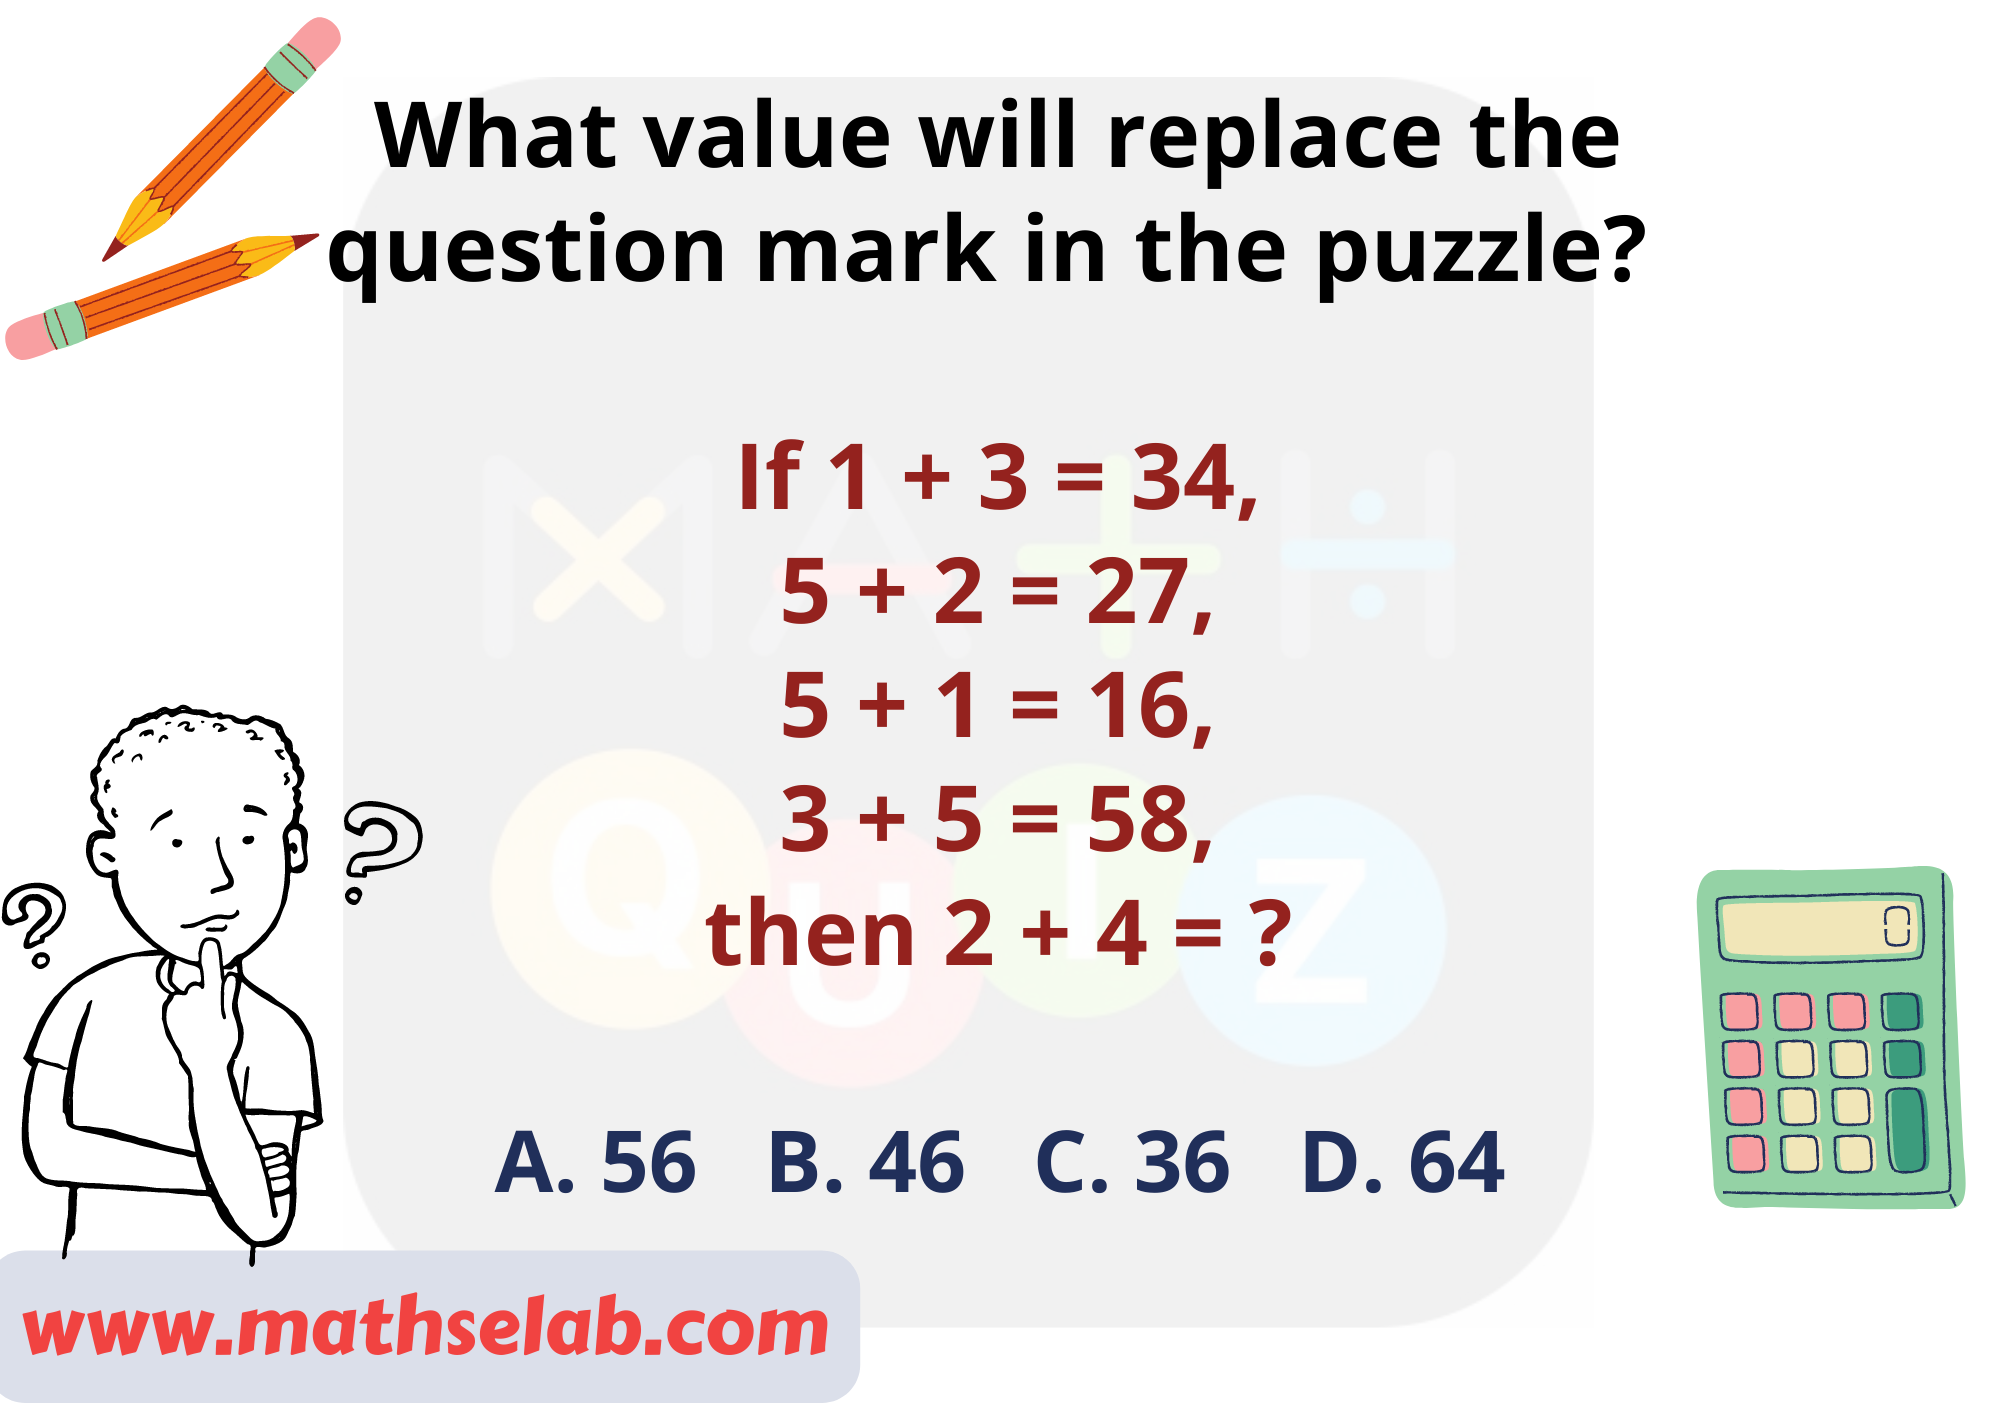 What value will replace the question mark in the puzzle If 1 + 3 = 34, 5 + 2 = 27, 5 + 1 = 16, 3 + 5 = 58, then 2 + 4 = - www.mathselab.com (1)